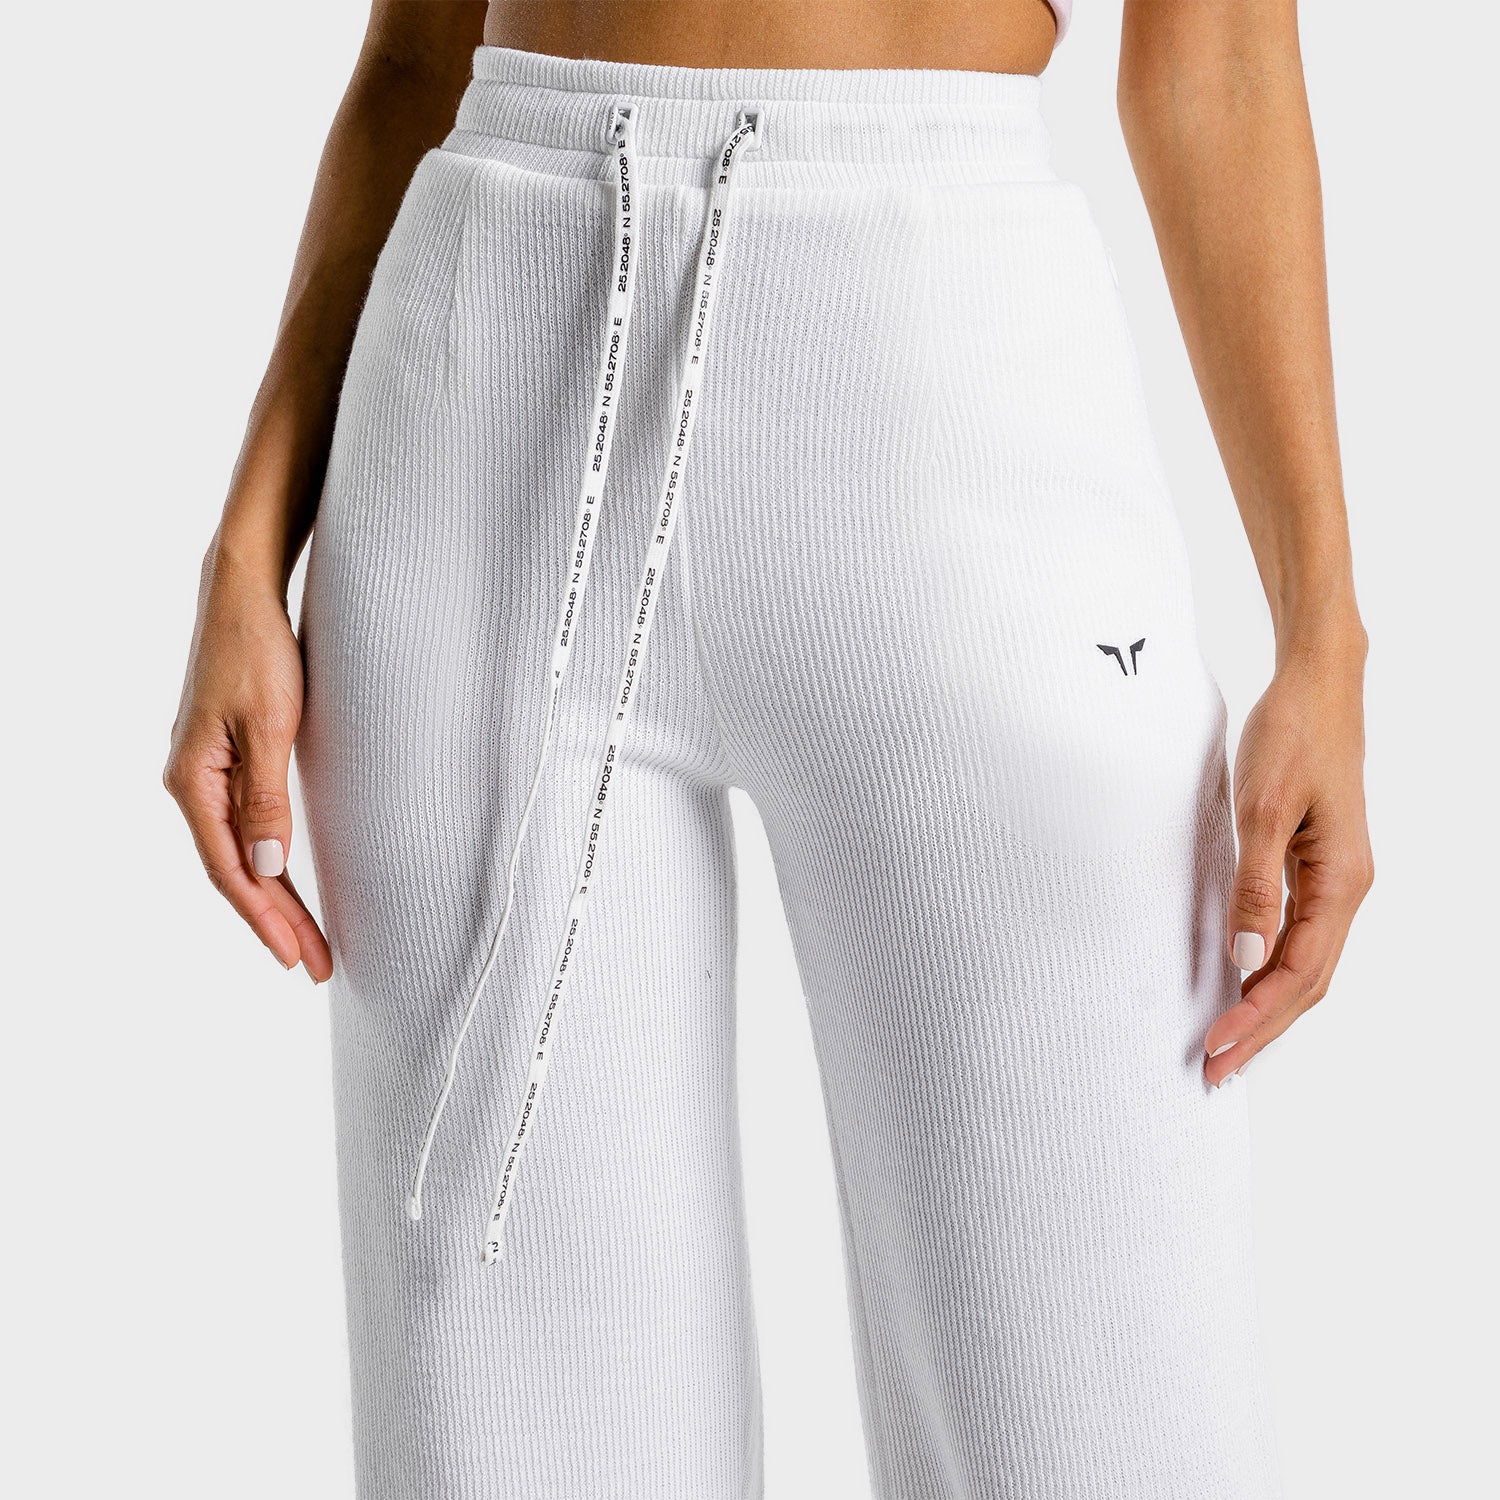 squatwolf-gym-pants-for-women-luxe-wide-leg-pants-white-workout-clothes